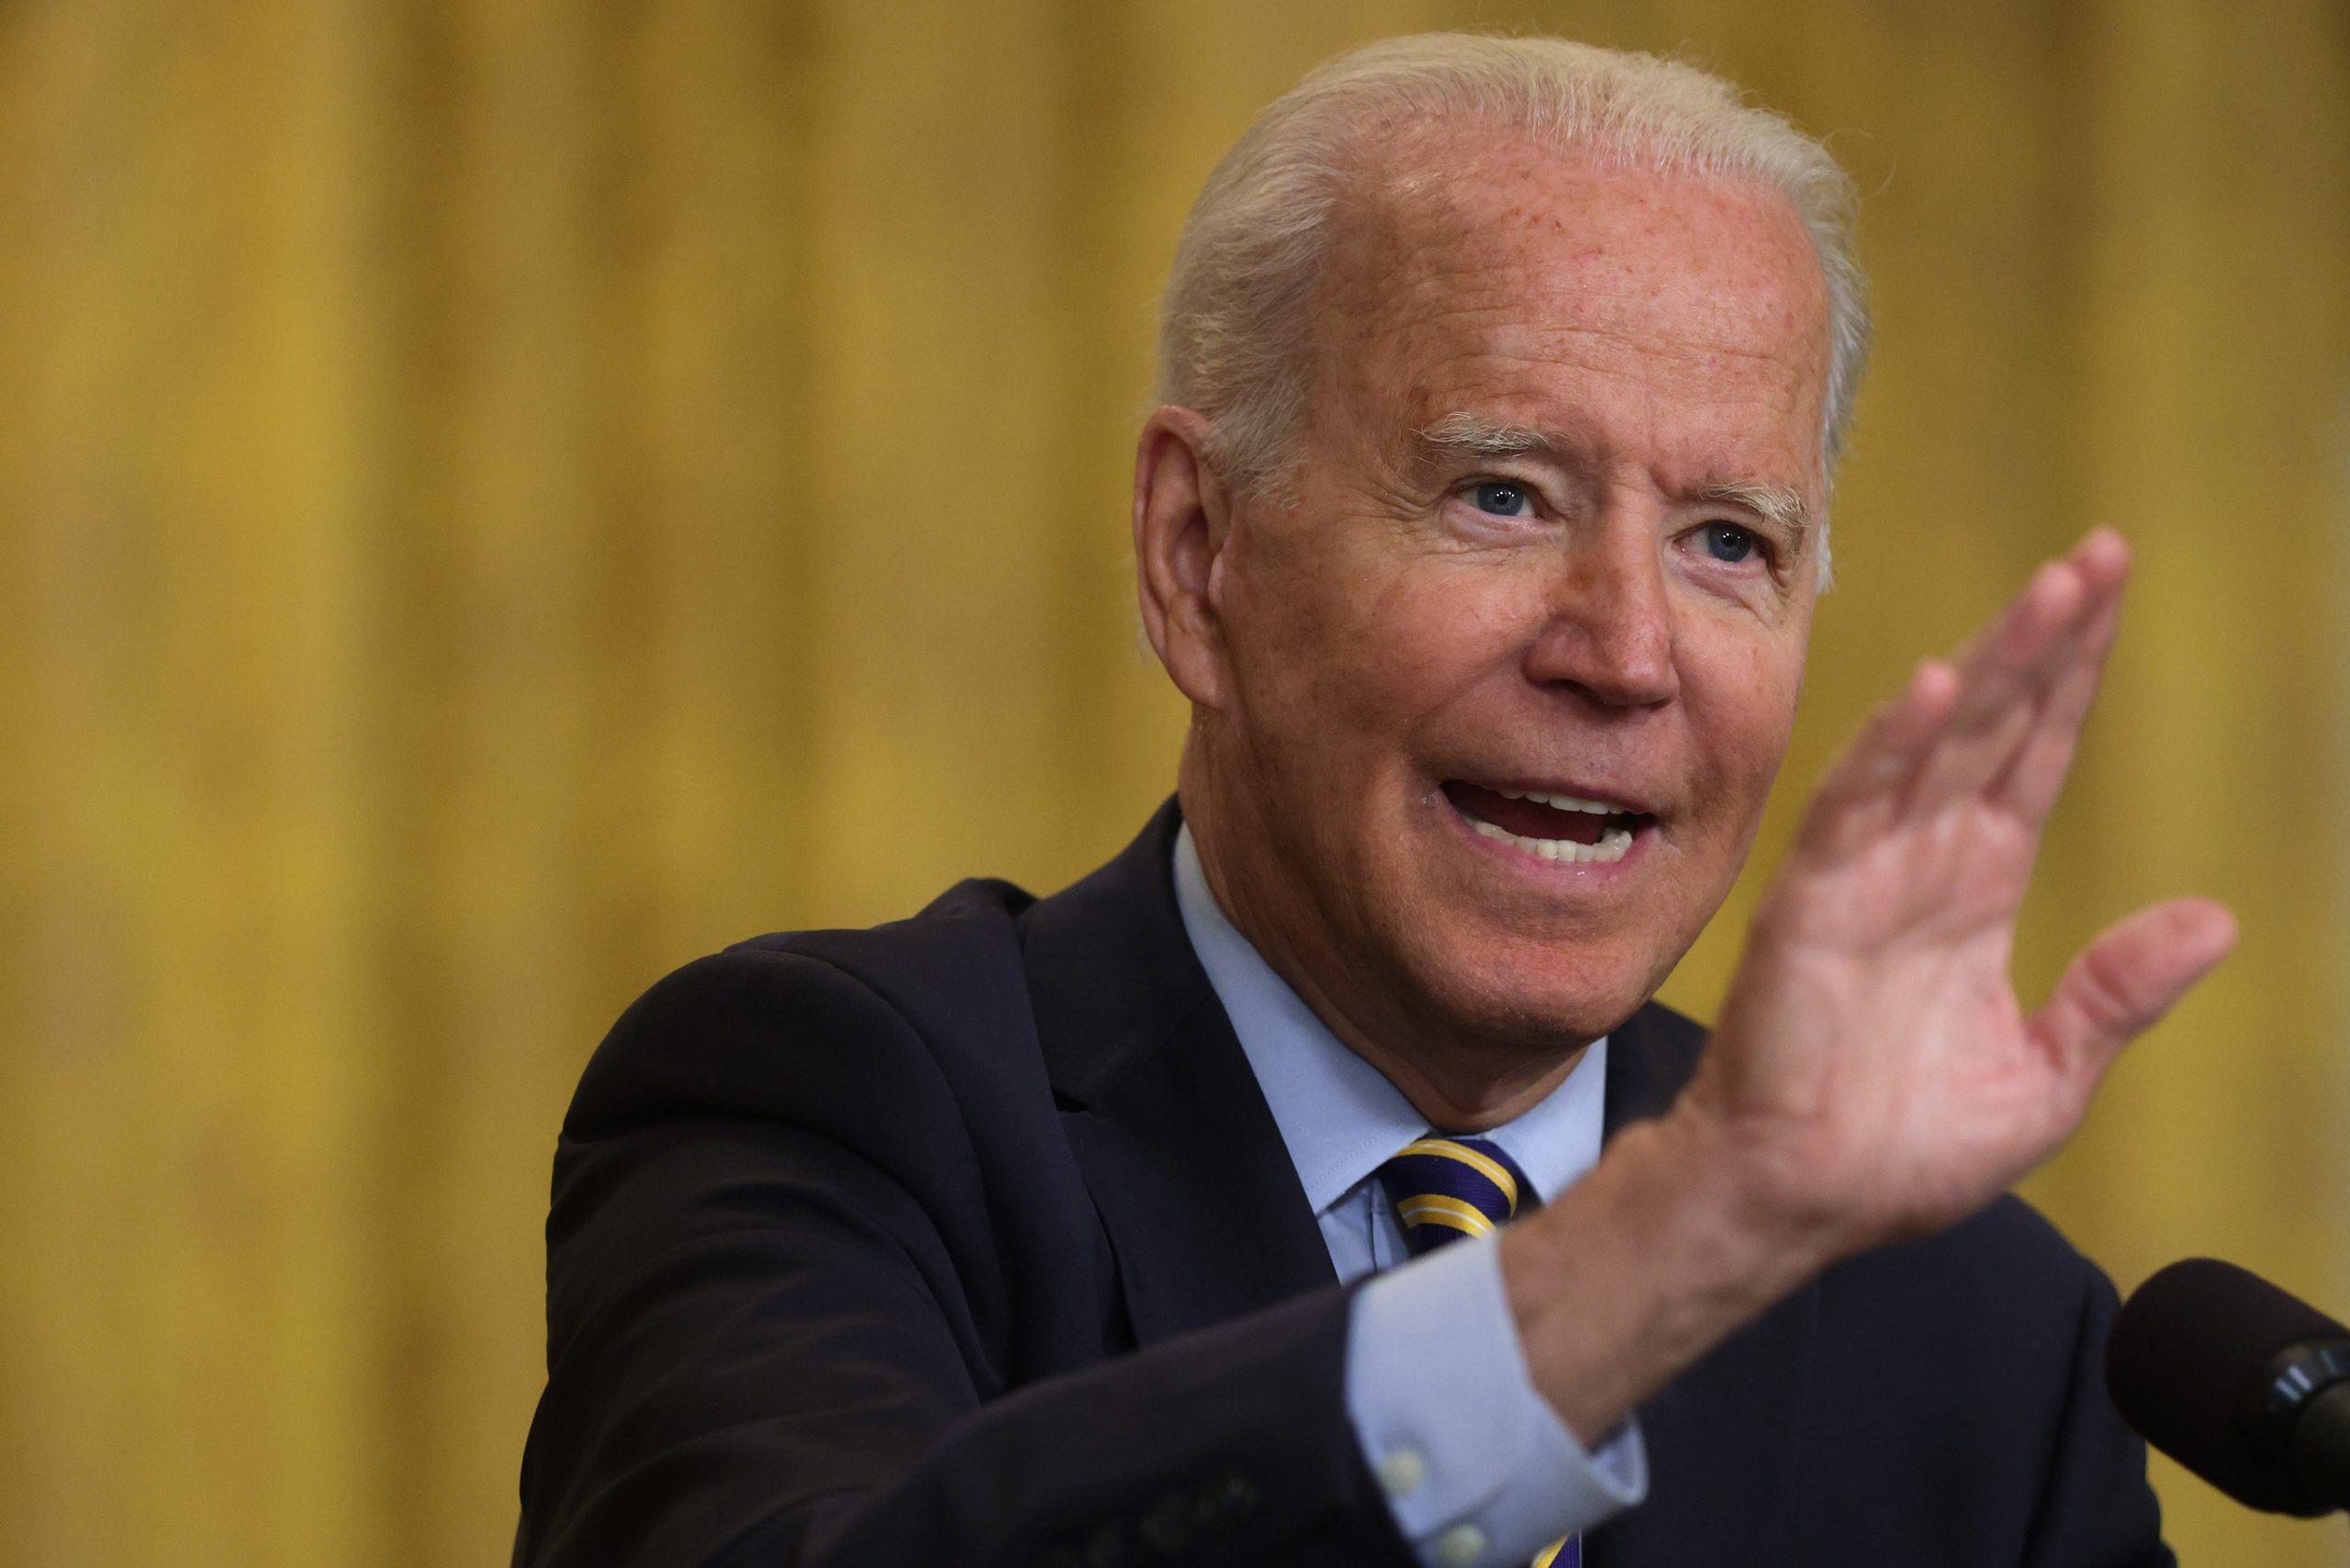 Here's how Biden's decision making on Afghanistan unfolded